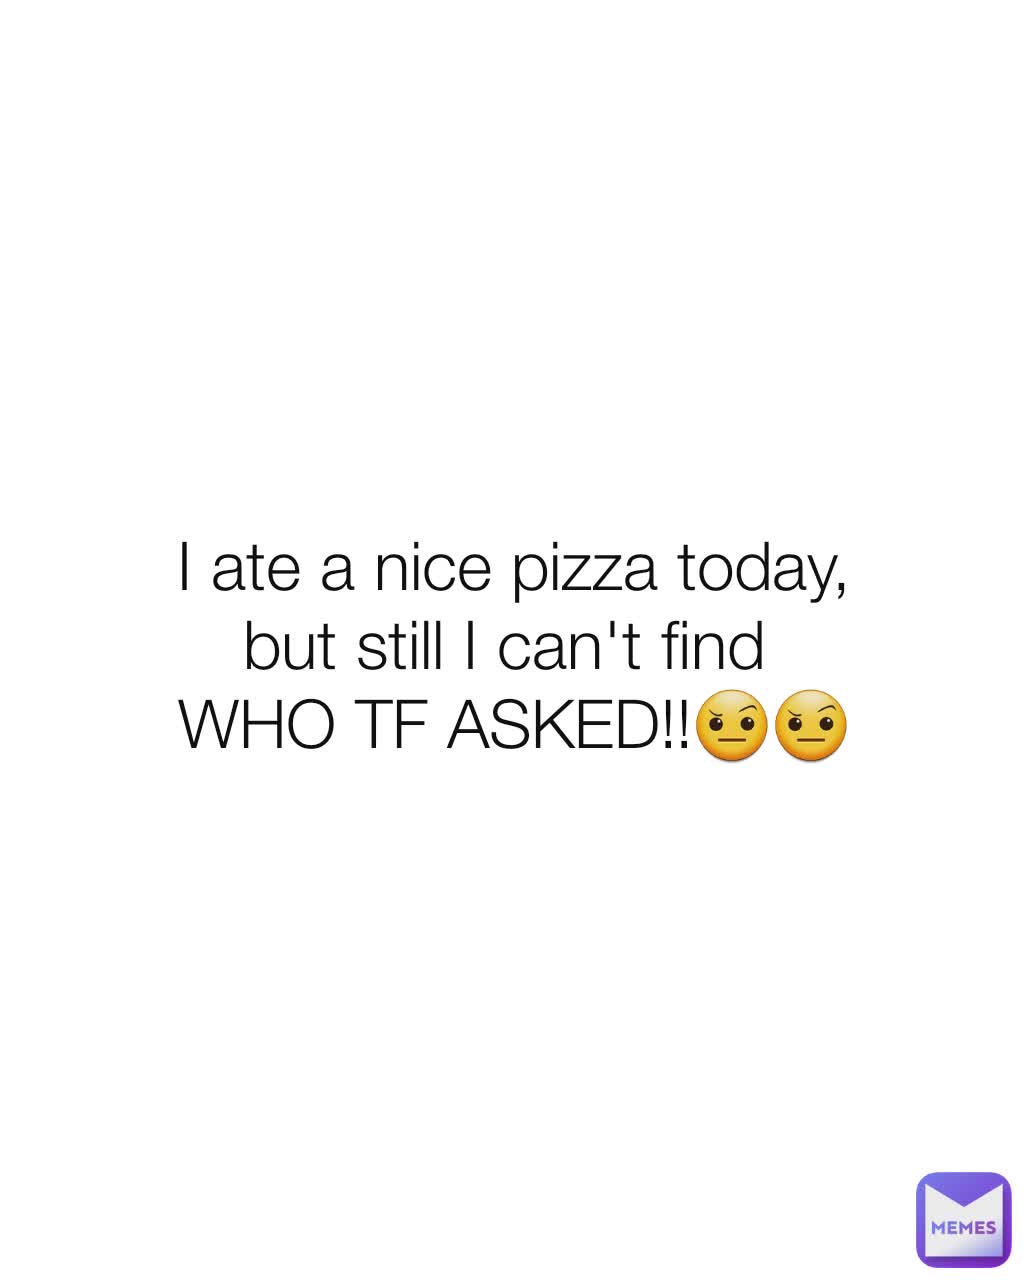 I ate a nice pizza today,
but still I can't find 
WHO TF ASKED!!🤨🤨